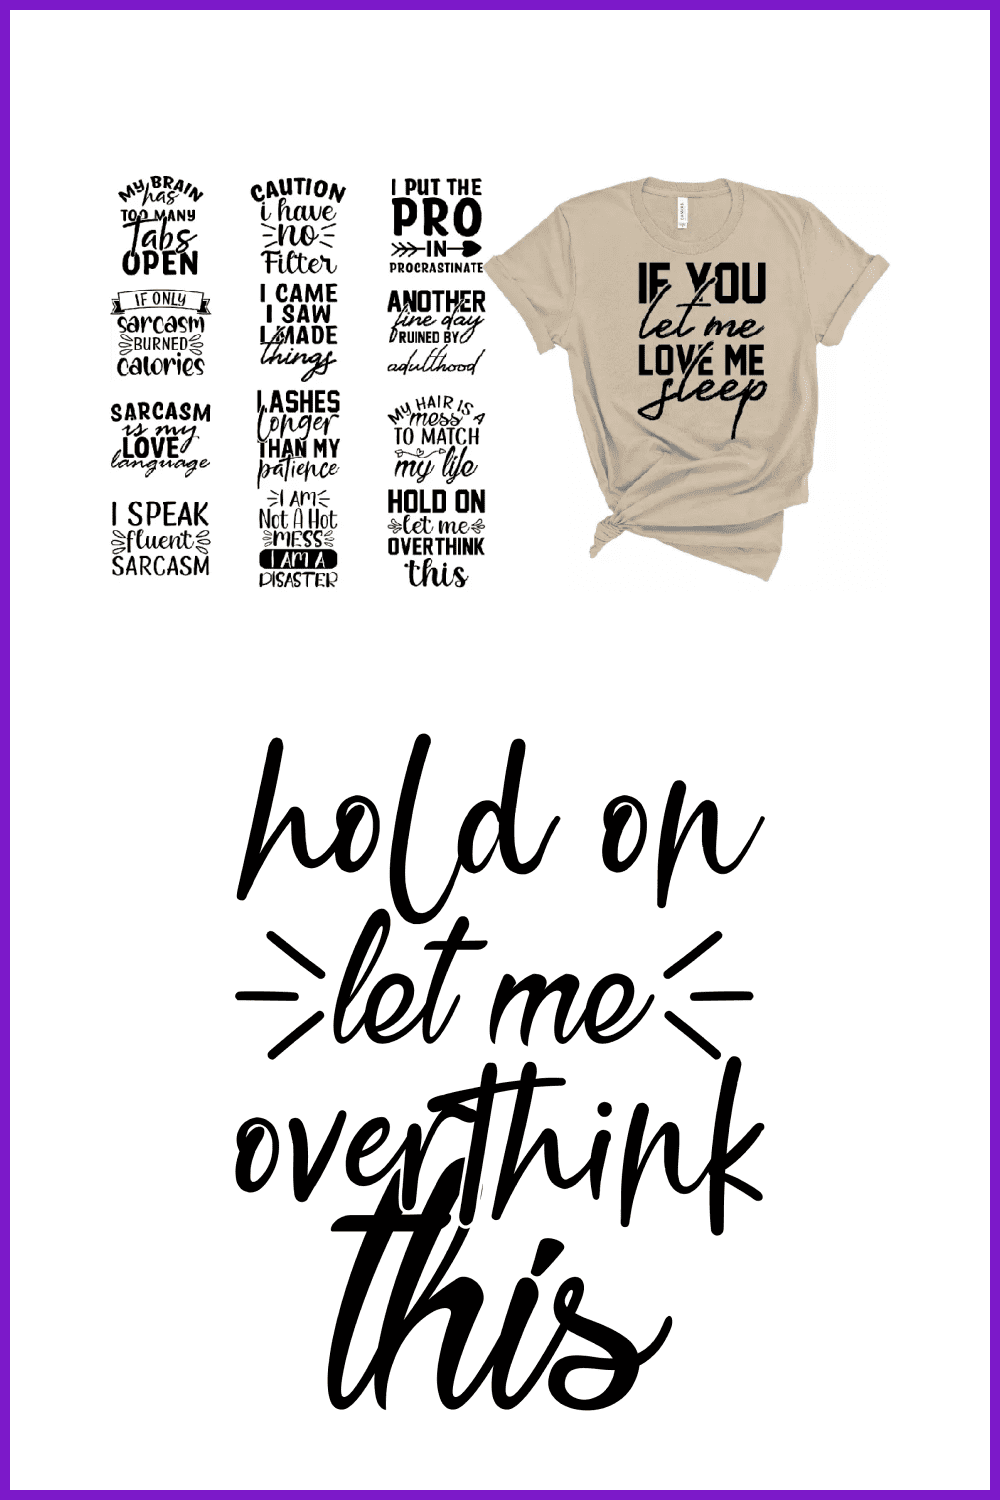 Collage of sarcastic inscriptions on t-shirts.